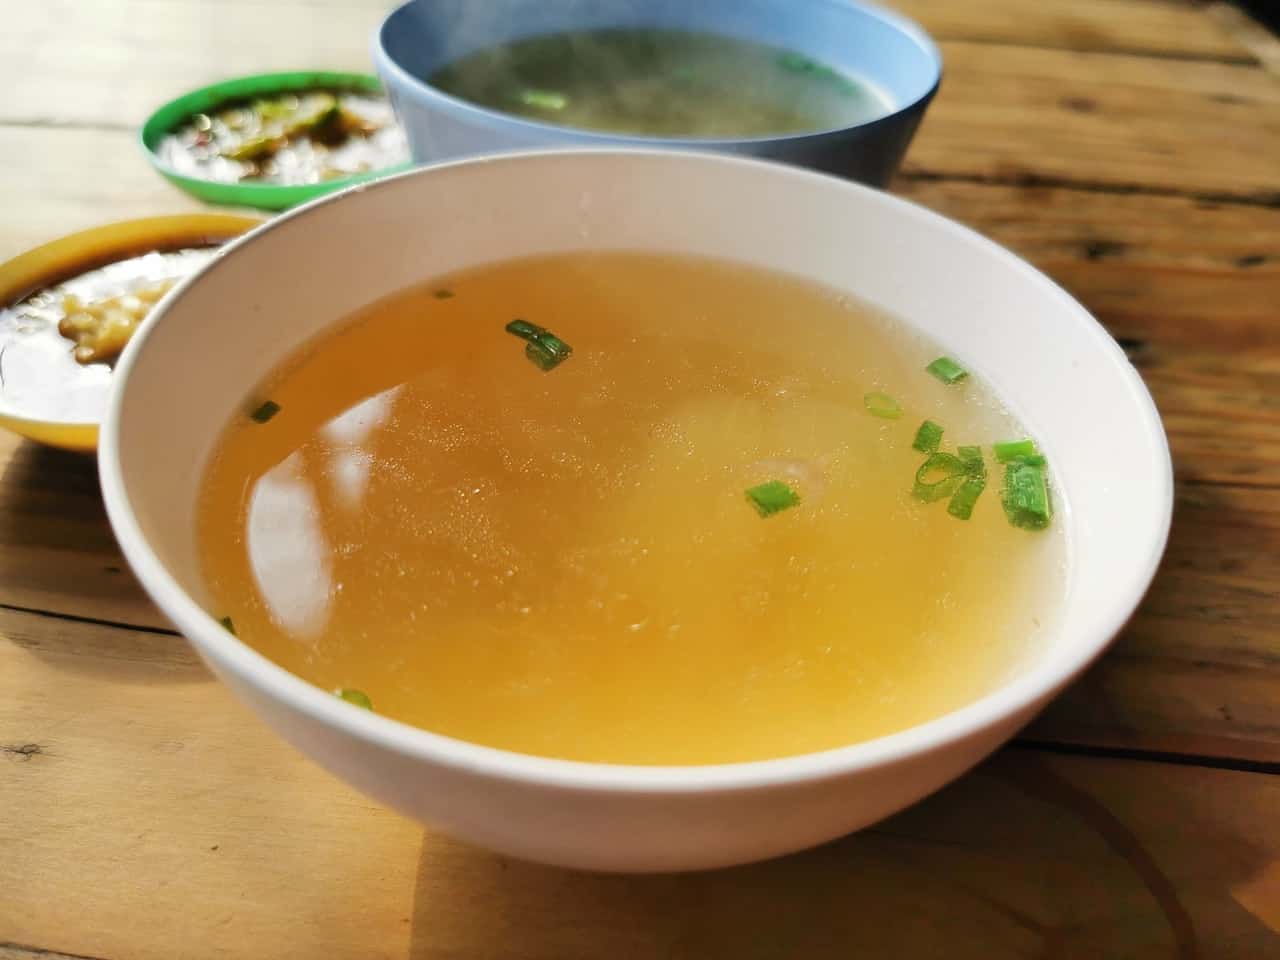 How to make vegetable broth?